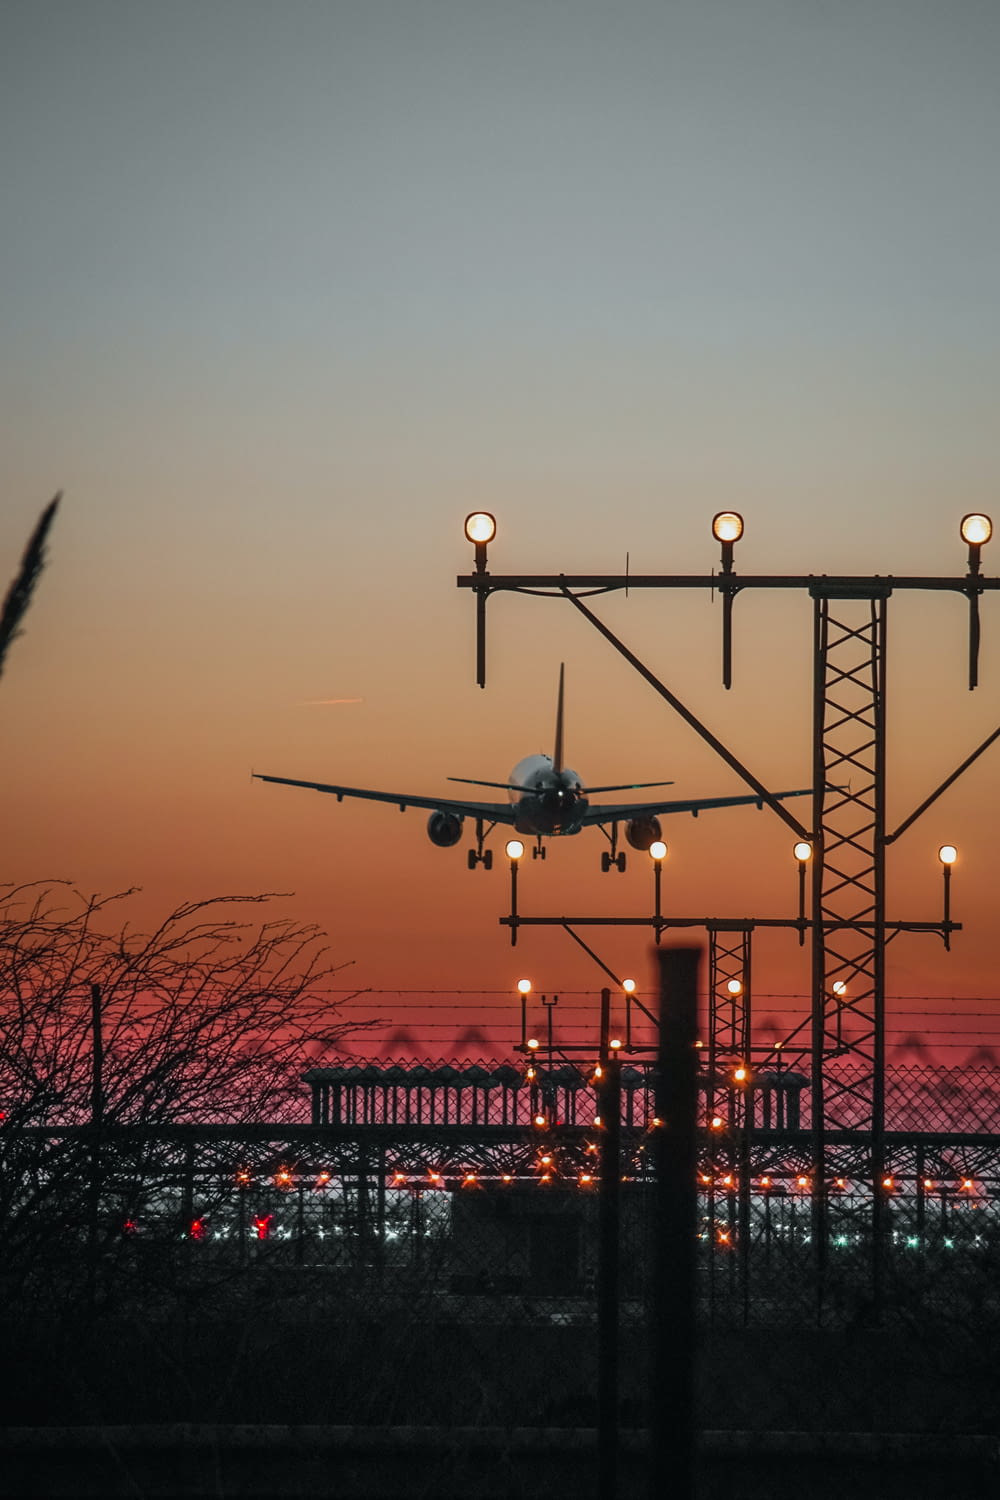 an airplane is taking off from an airport runway